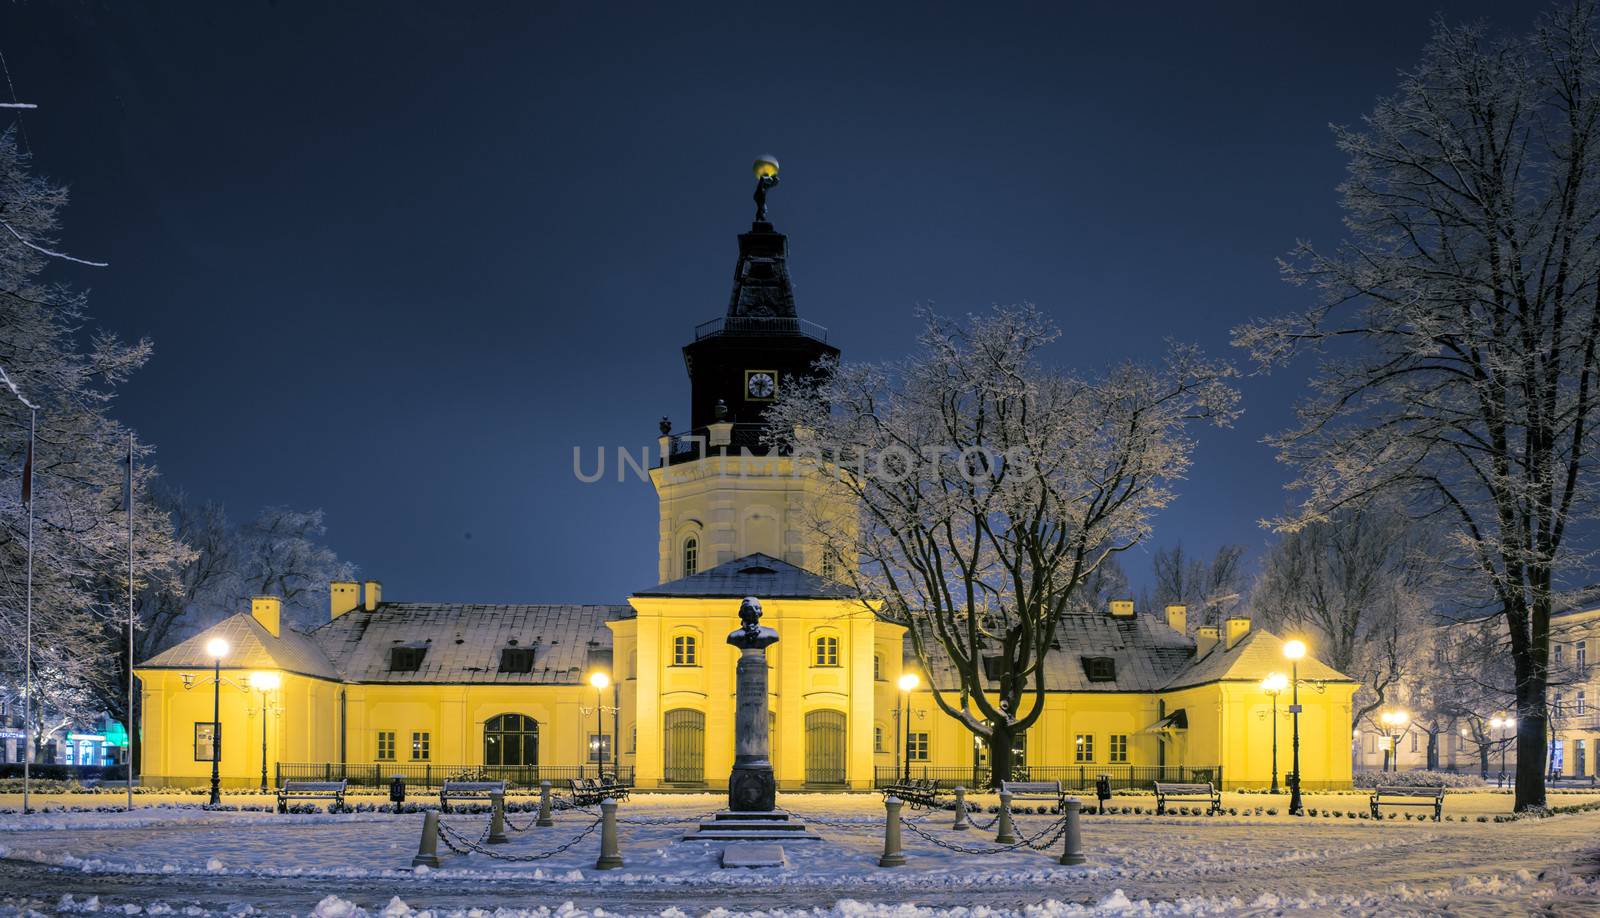 Town Hall in Siedlce, Poland in winter at night